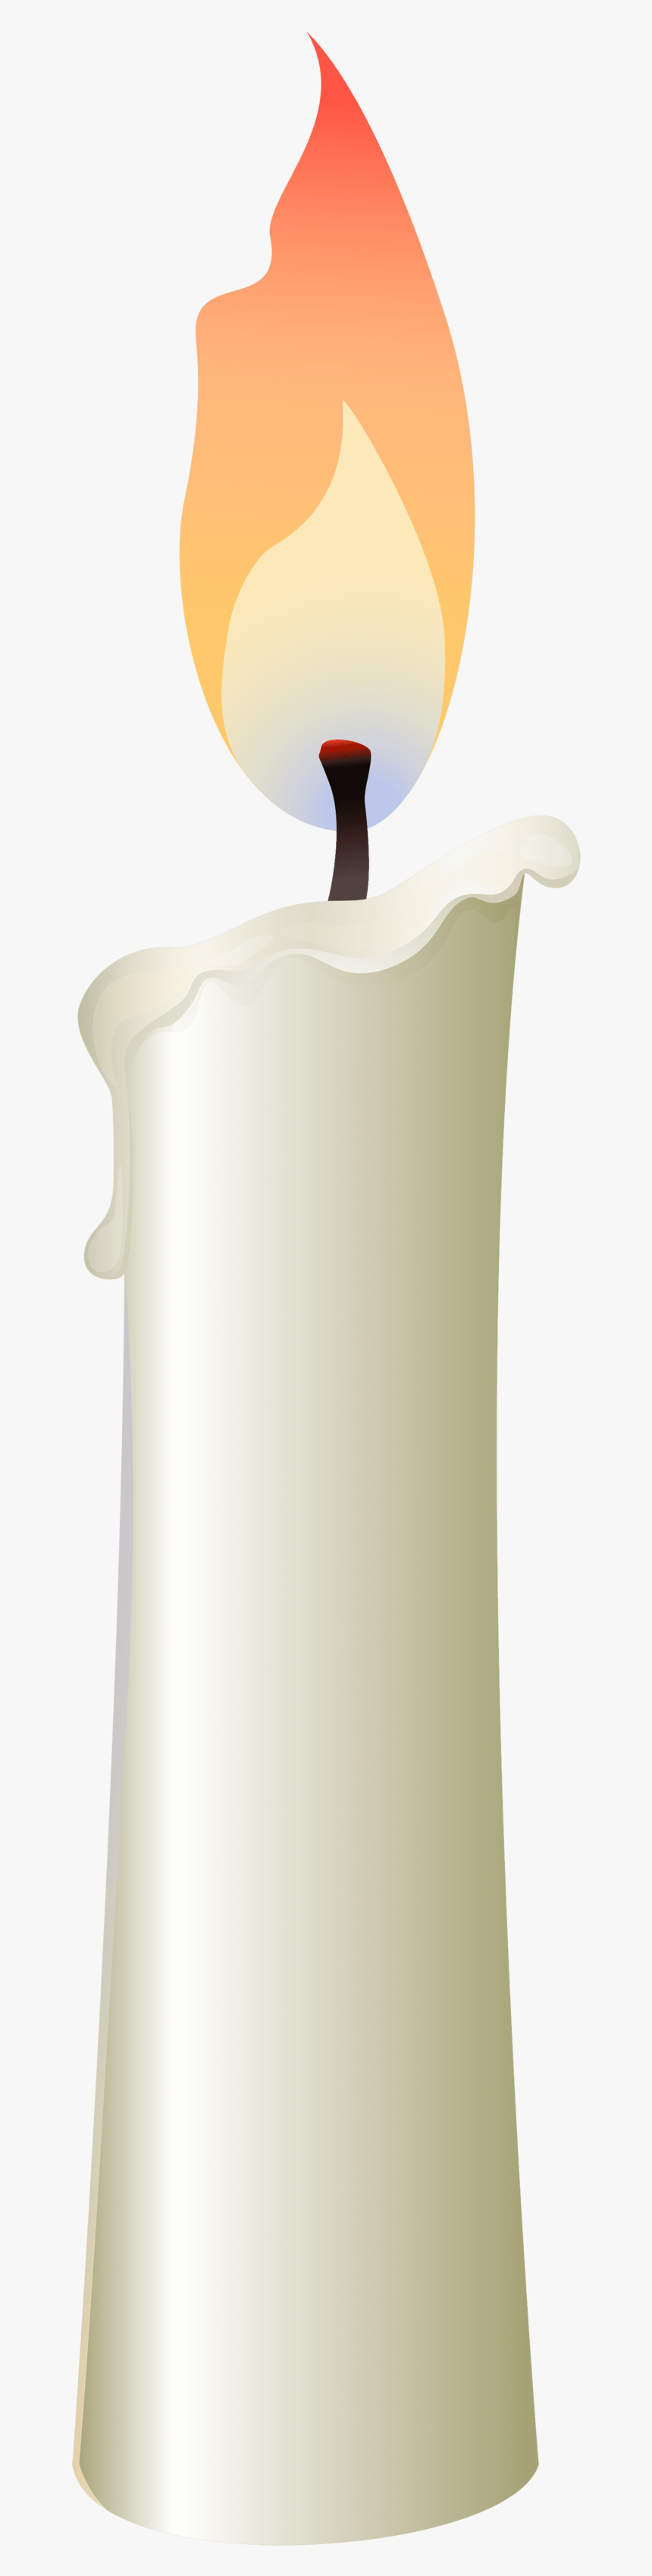 White Candle Png - Bougie Dessin Fond Transparent, Png Download, Free Download